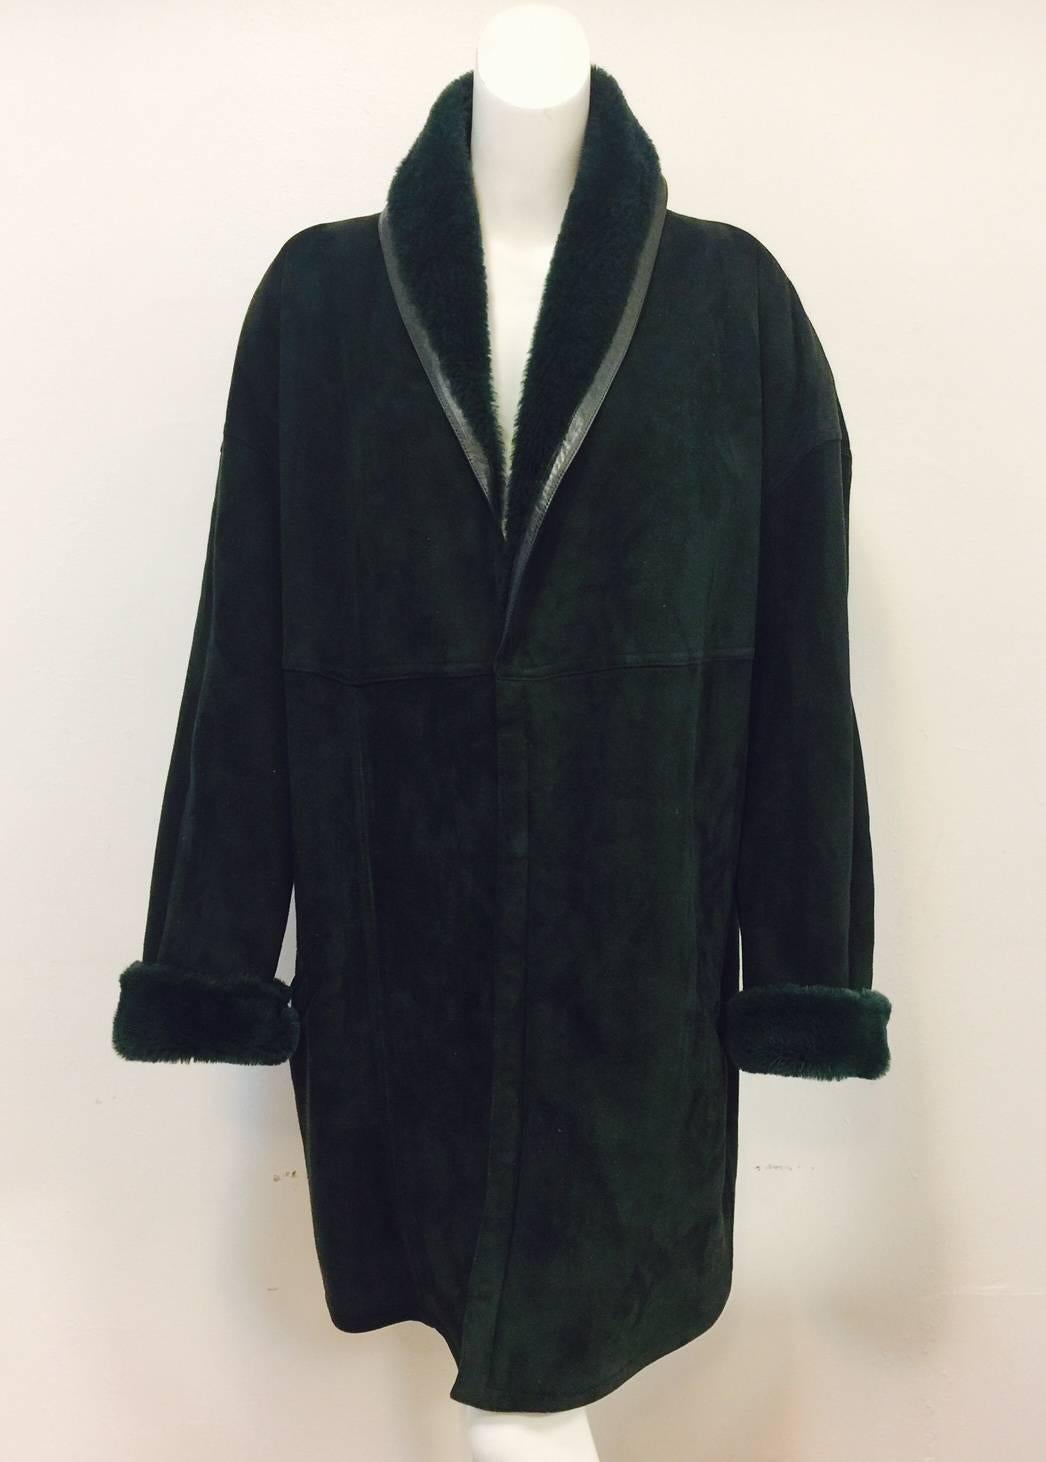 This Gianni Versace Coat is a must for any connoisseur of this legendary designer's menswear!  Features ultra-luxurious, weighty deep forest green shearling, generous shawl collar and 5-snap closure.  Slightly padded round shoulders.  Two pockets